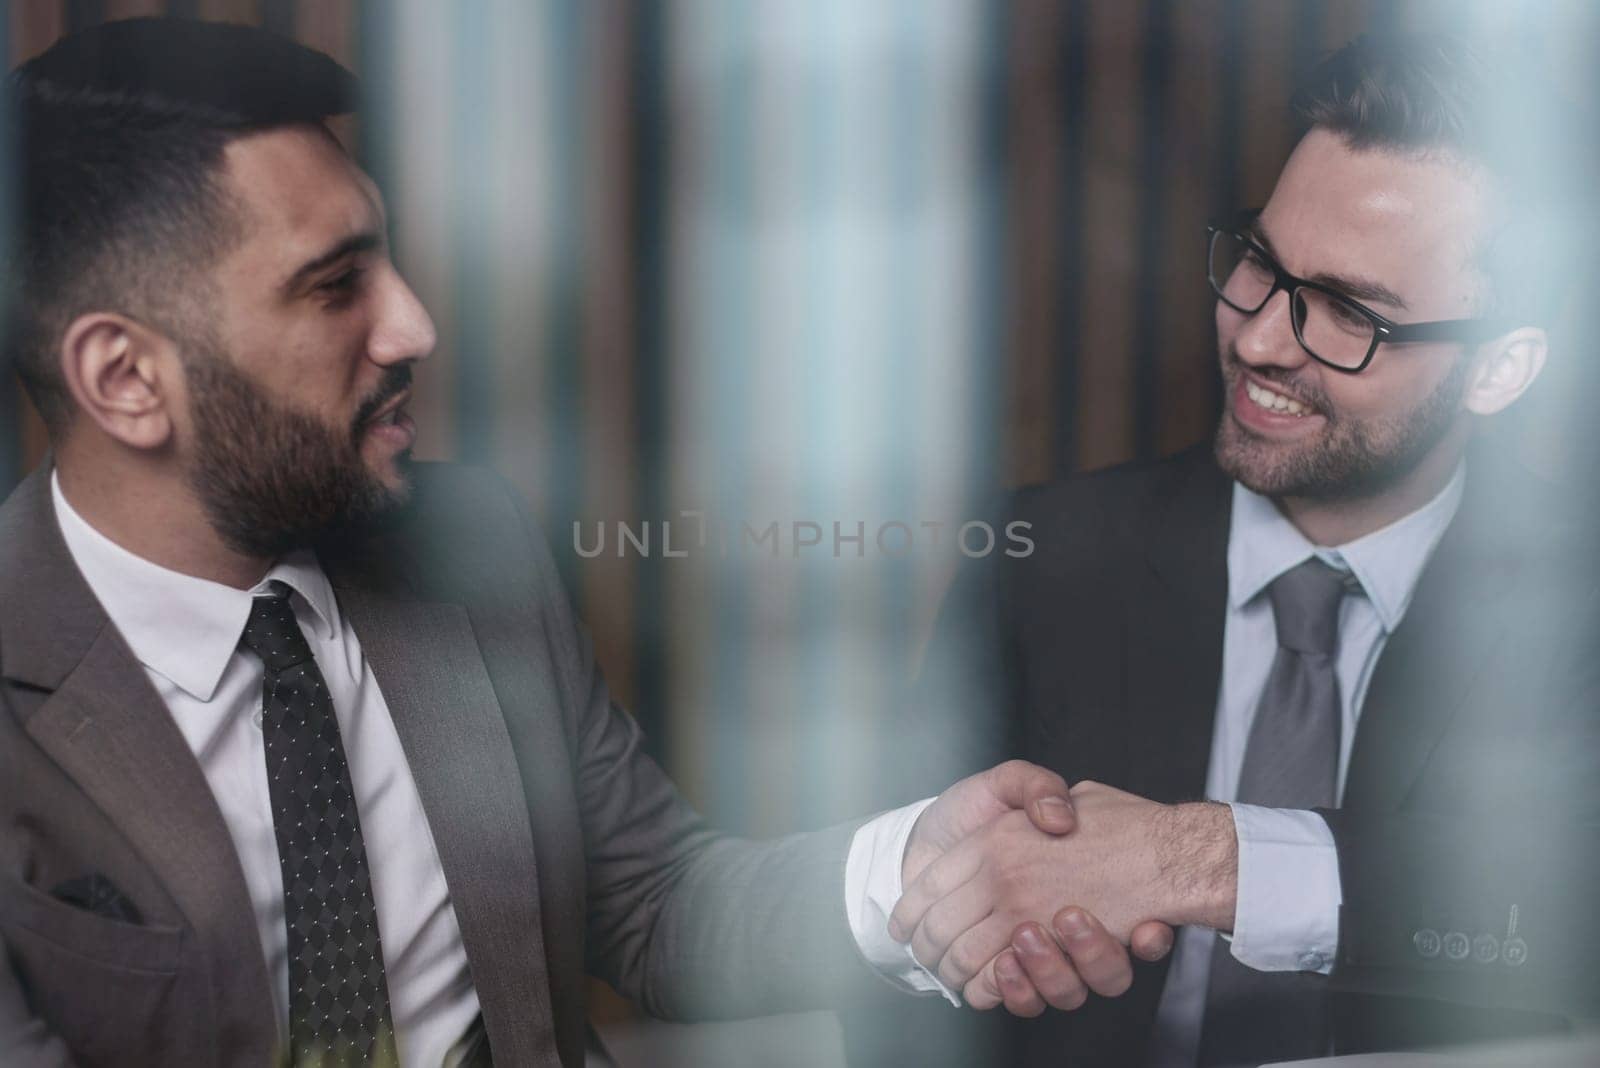 Two happy people make a good business deal and exchange confident handshakes. by Prosto